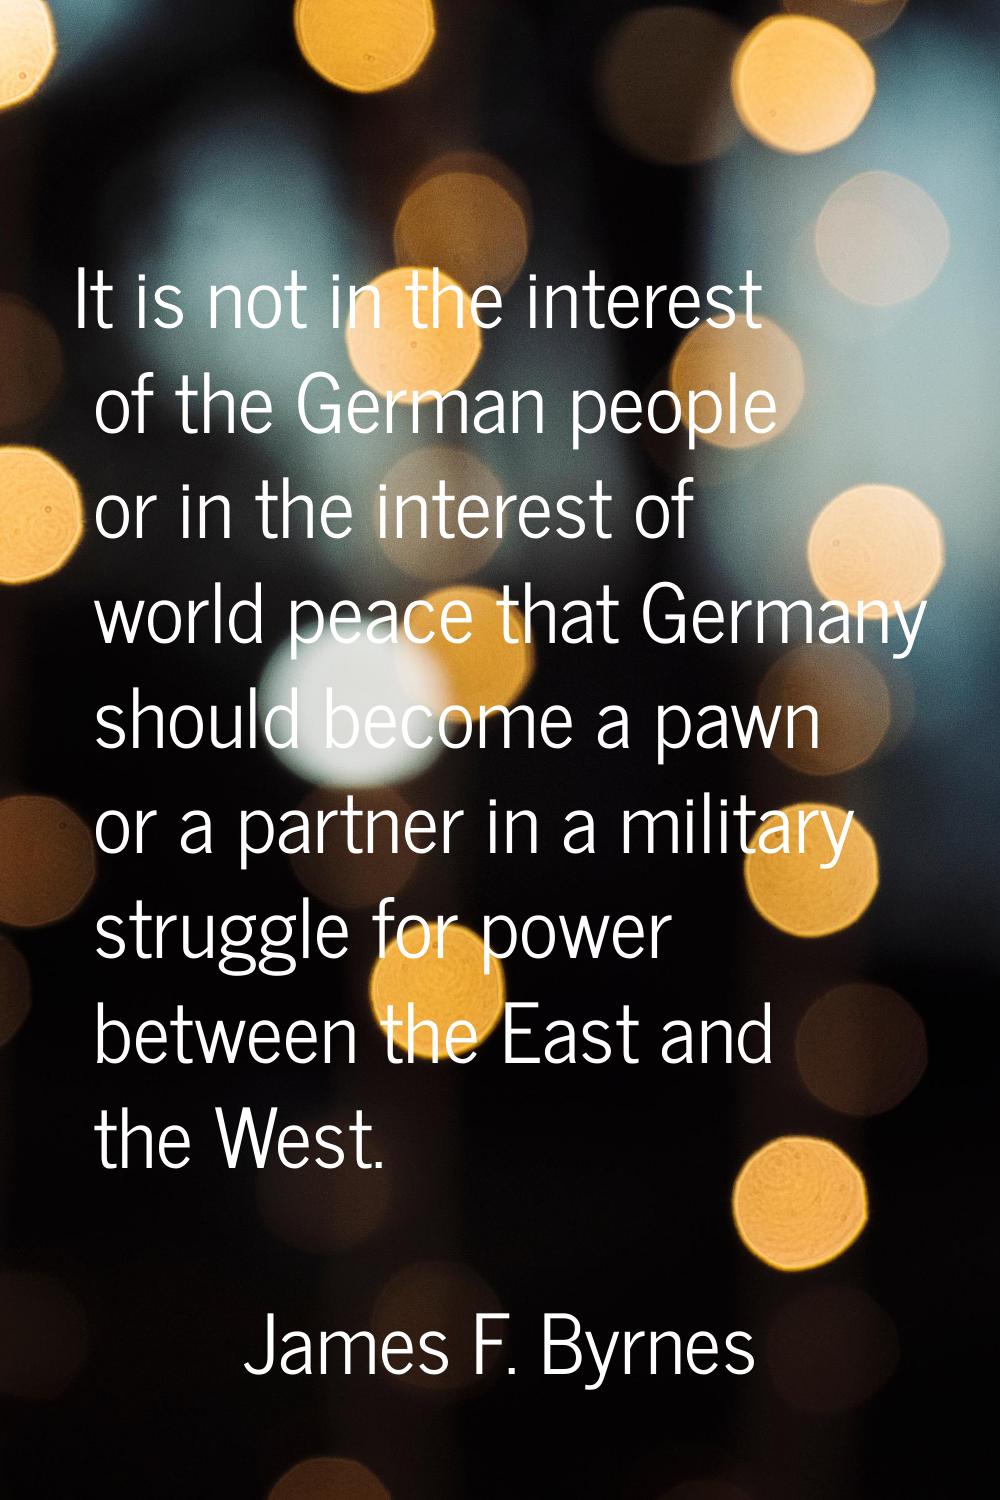 It is not in the interest of the German people or in the interest of world peace that Germany shoul